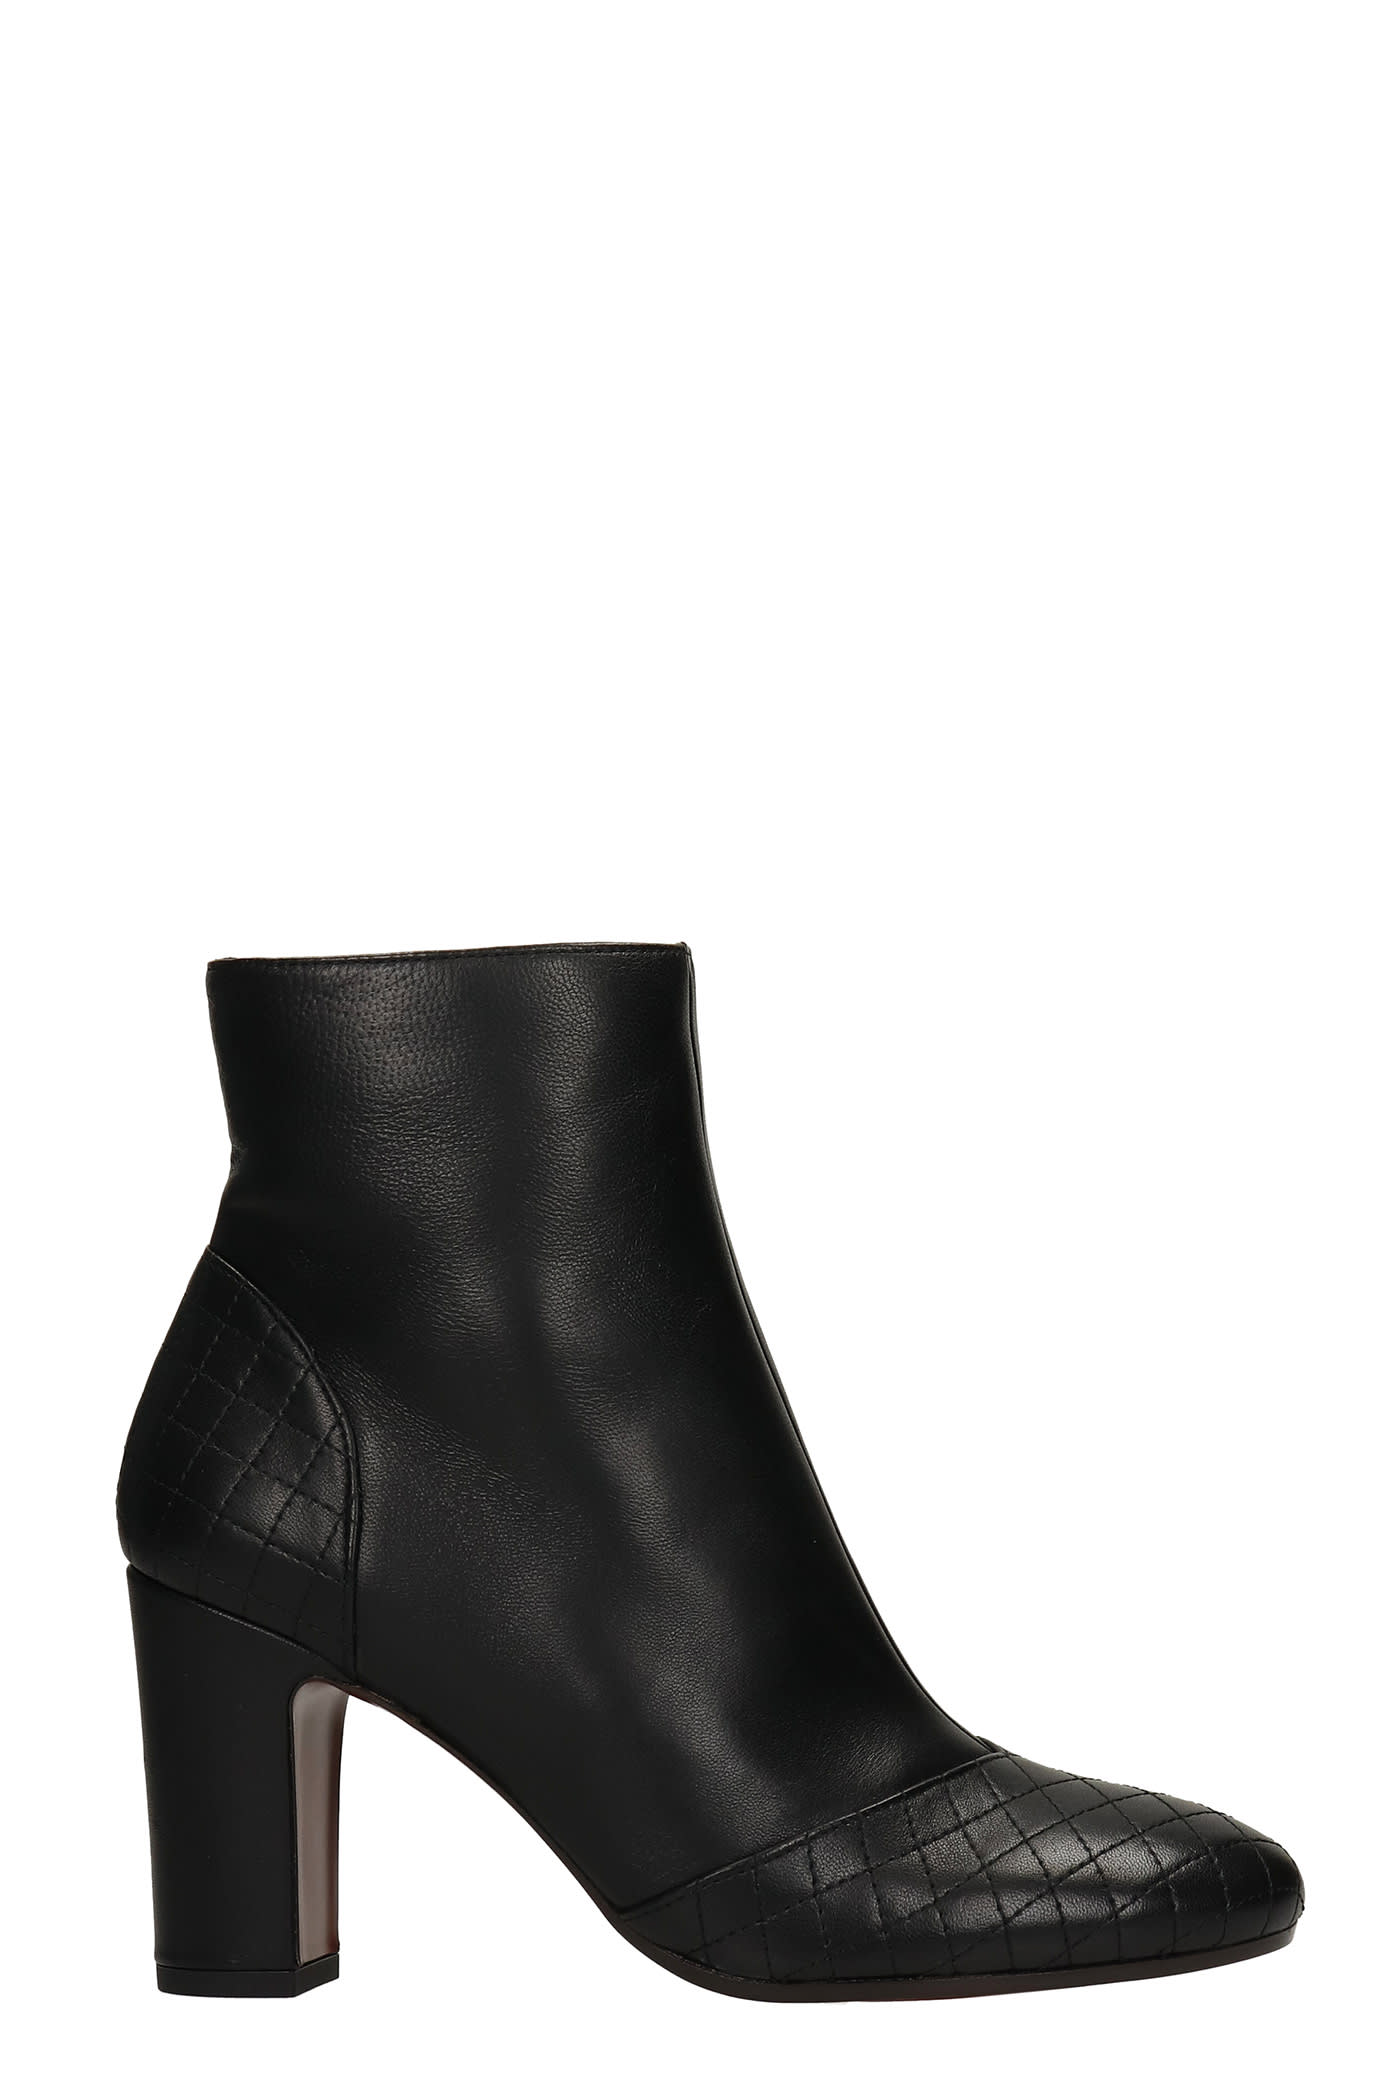 Chie Mihara Waida High Heels Ankle Boots In Black Leather